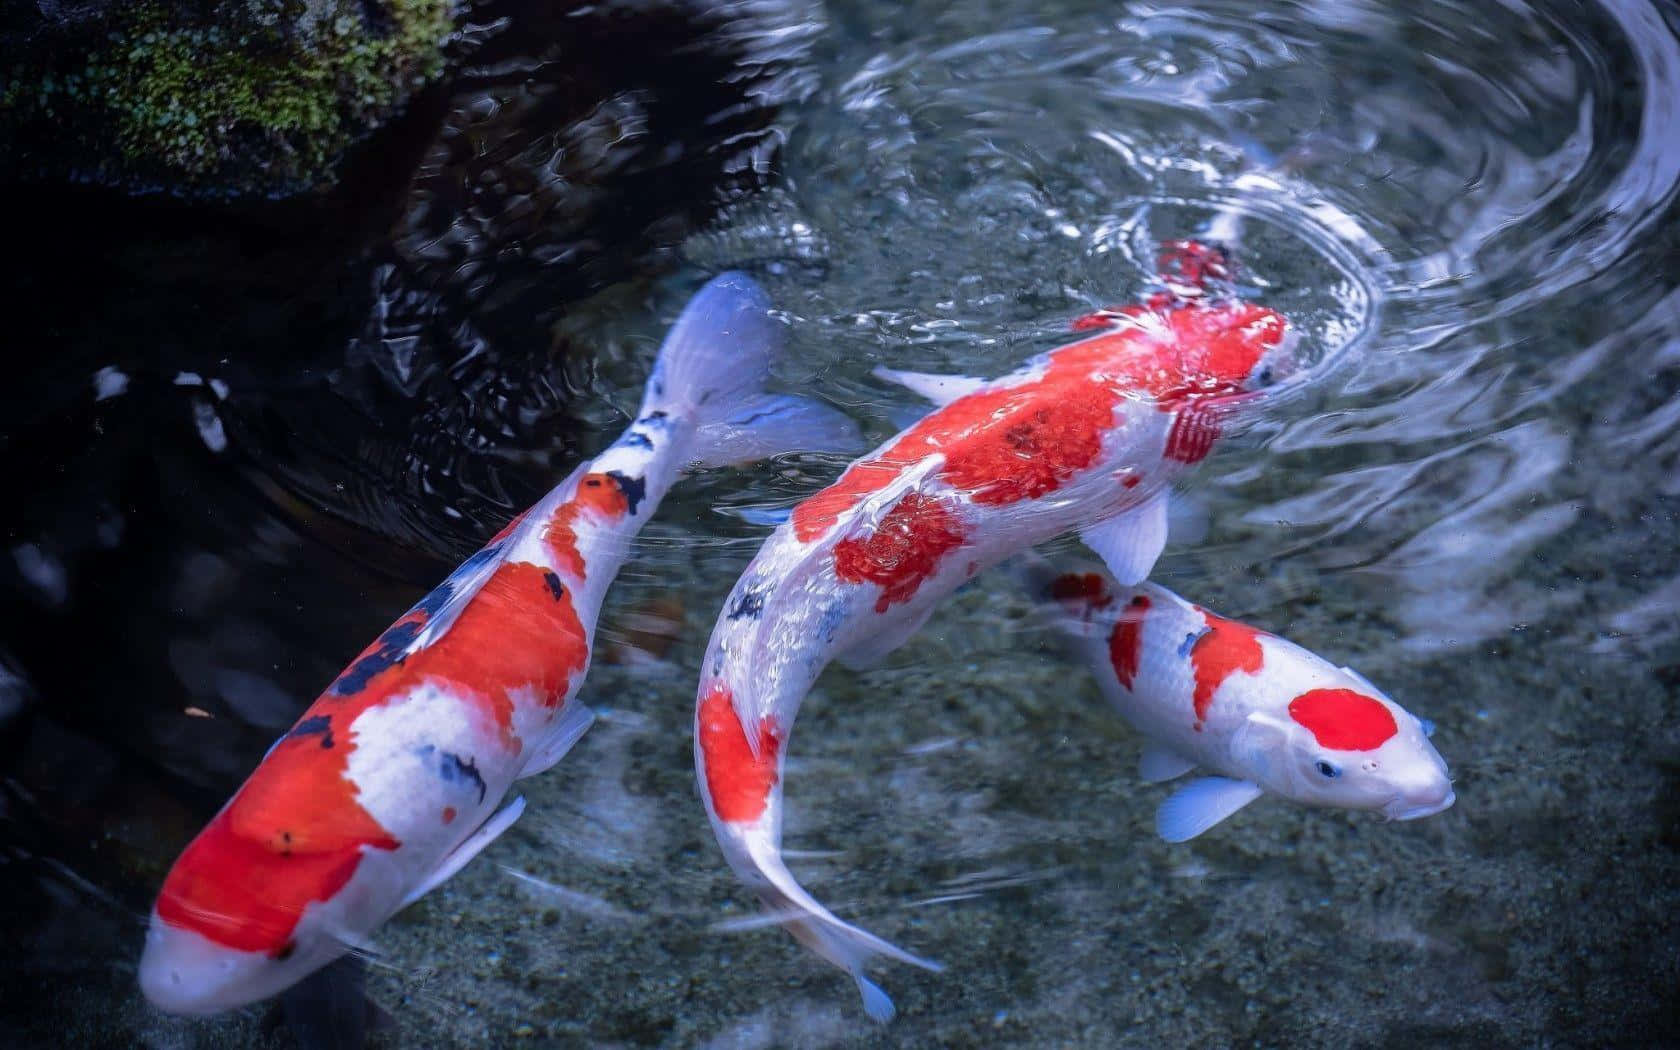 A serene pond with vibrant koi fish swimming peacefully